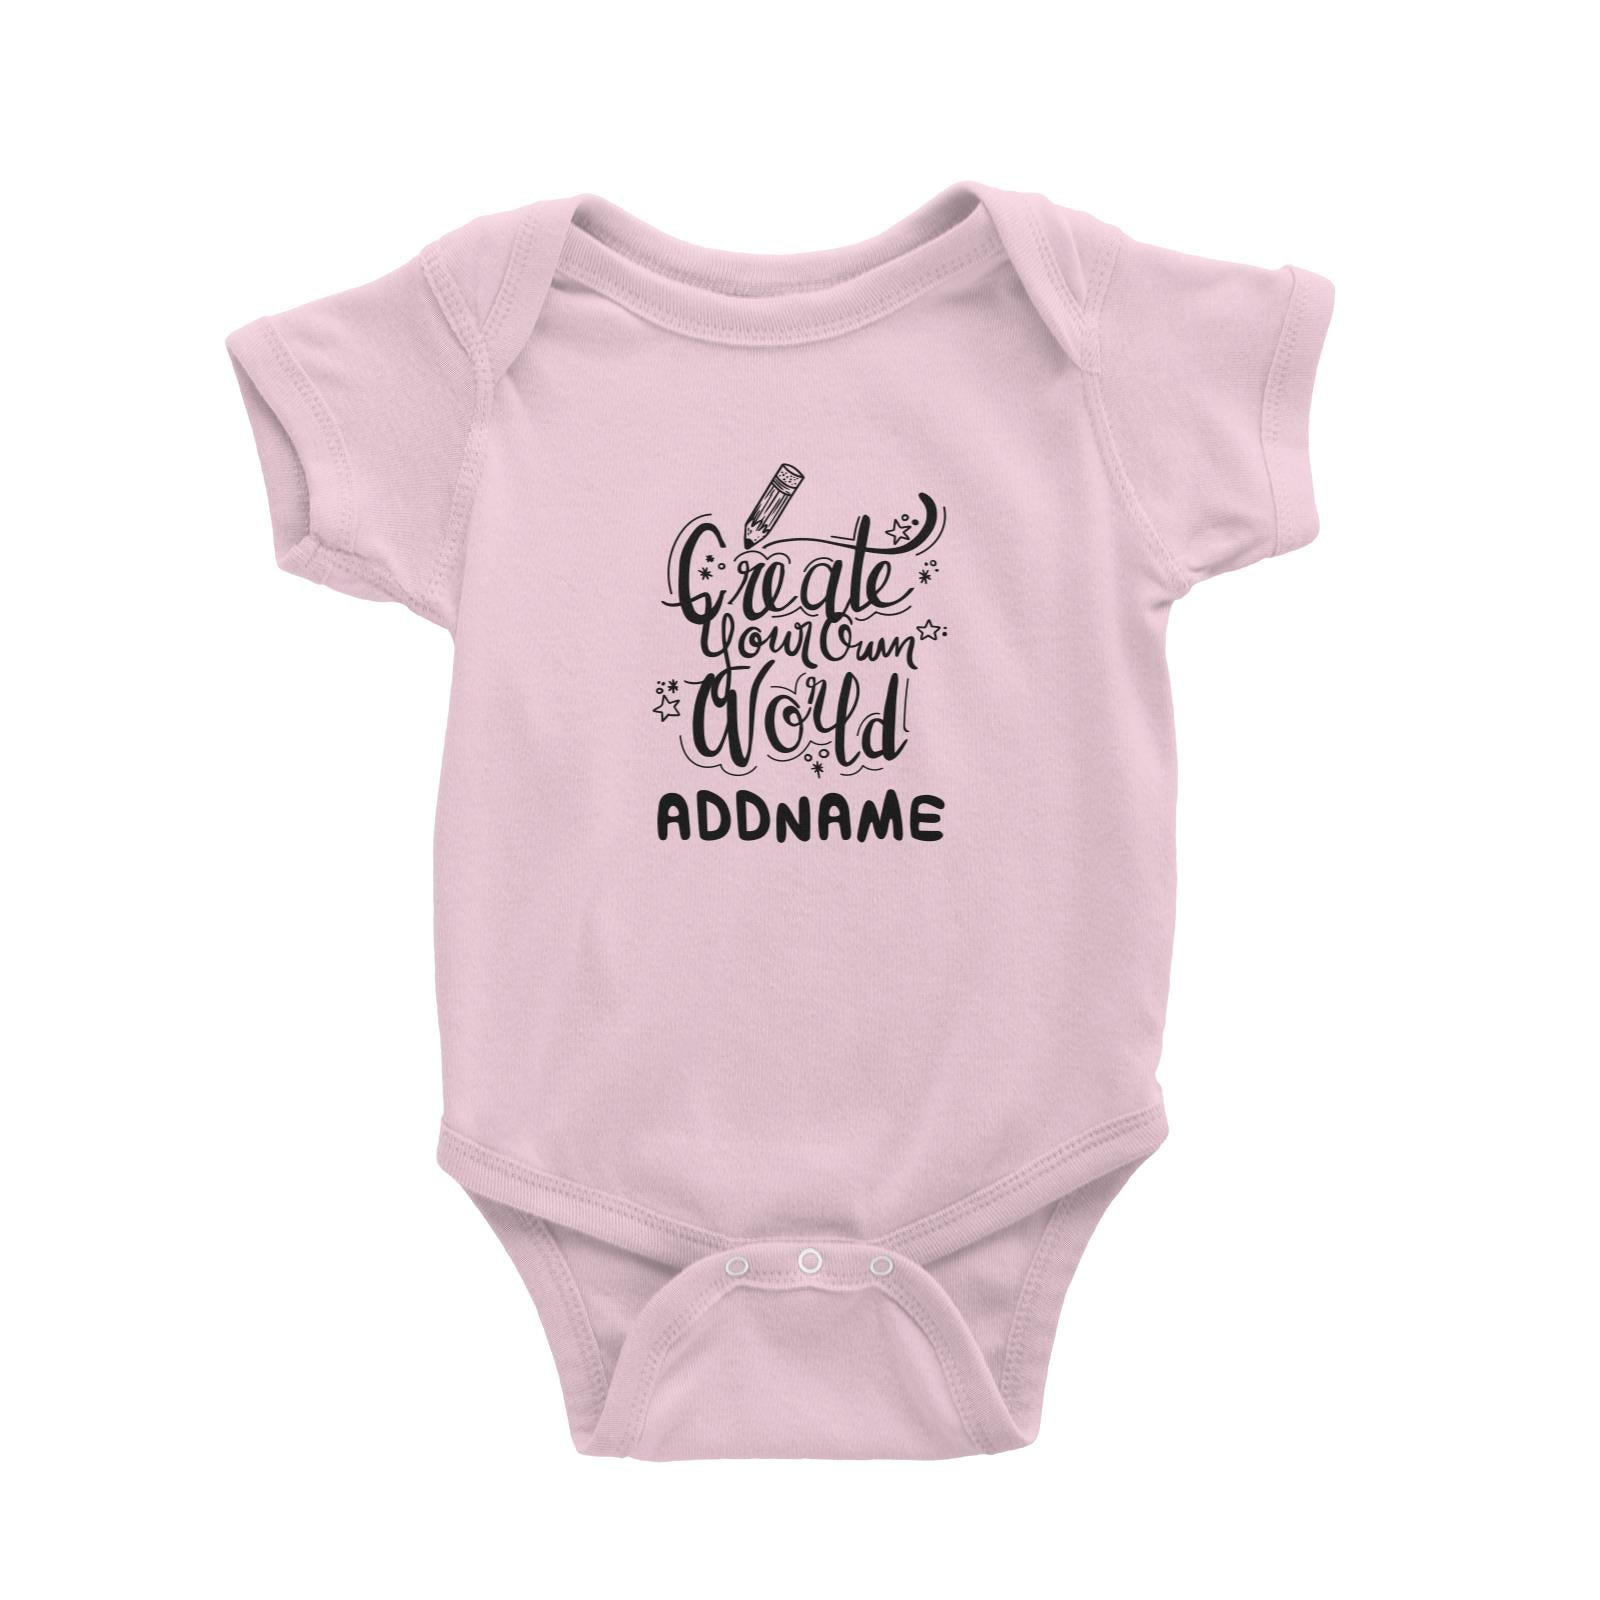 Children's Day Gift Series Create Your Own World Addname Baby Romper